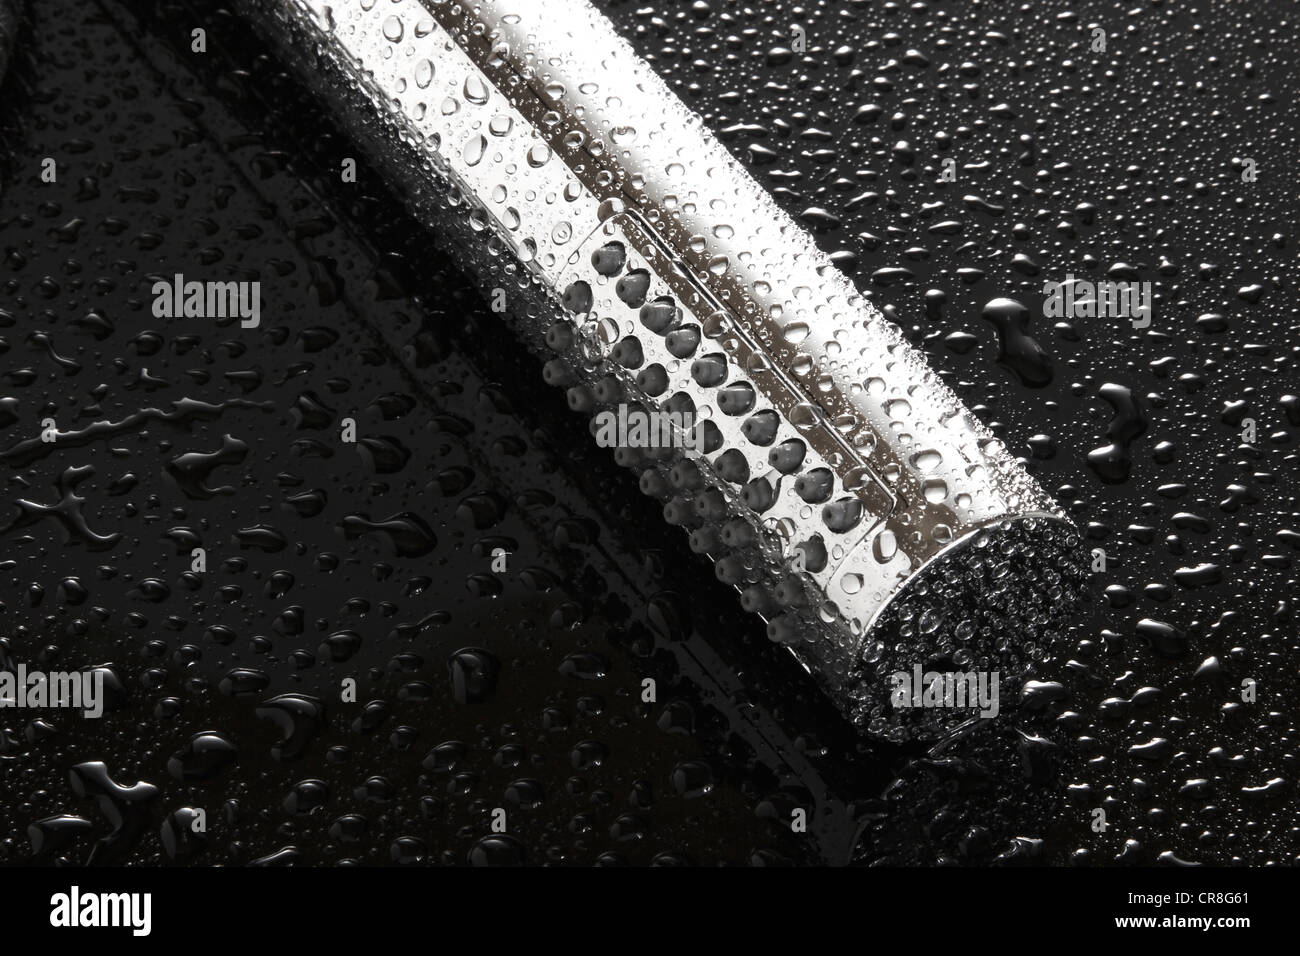 Shower head covered with water drops Stock Photo